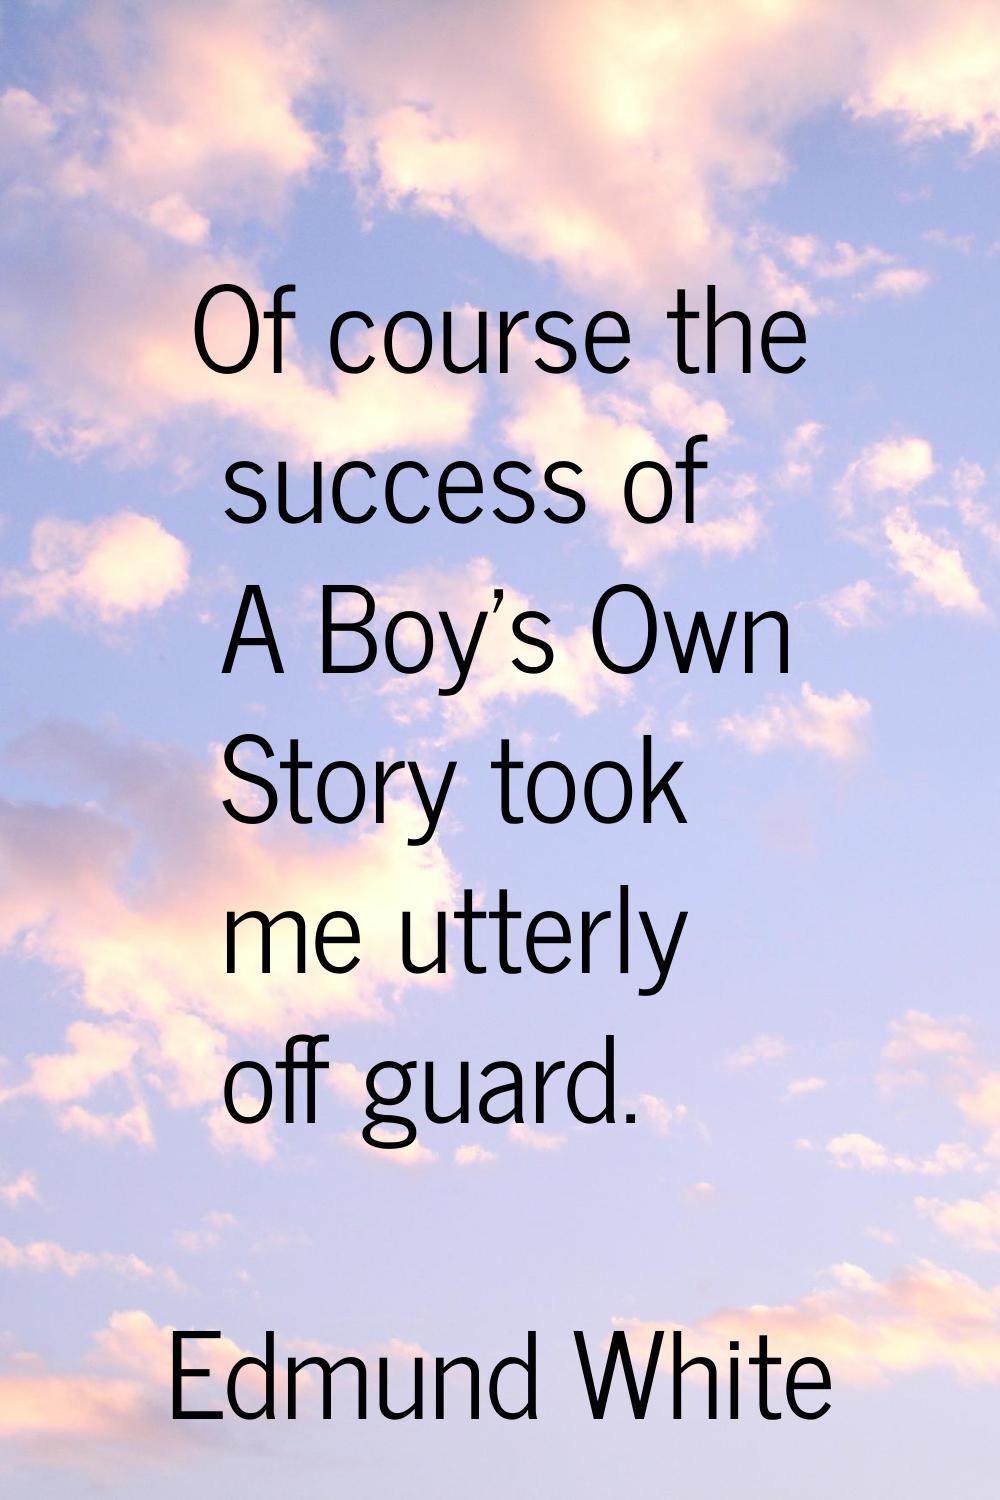 Of course the success of A Boy's Own Story took me utterly off guard.